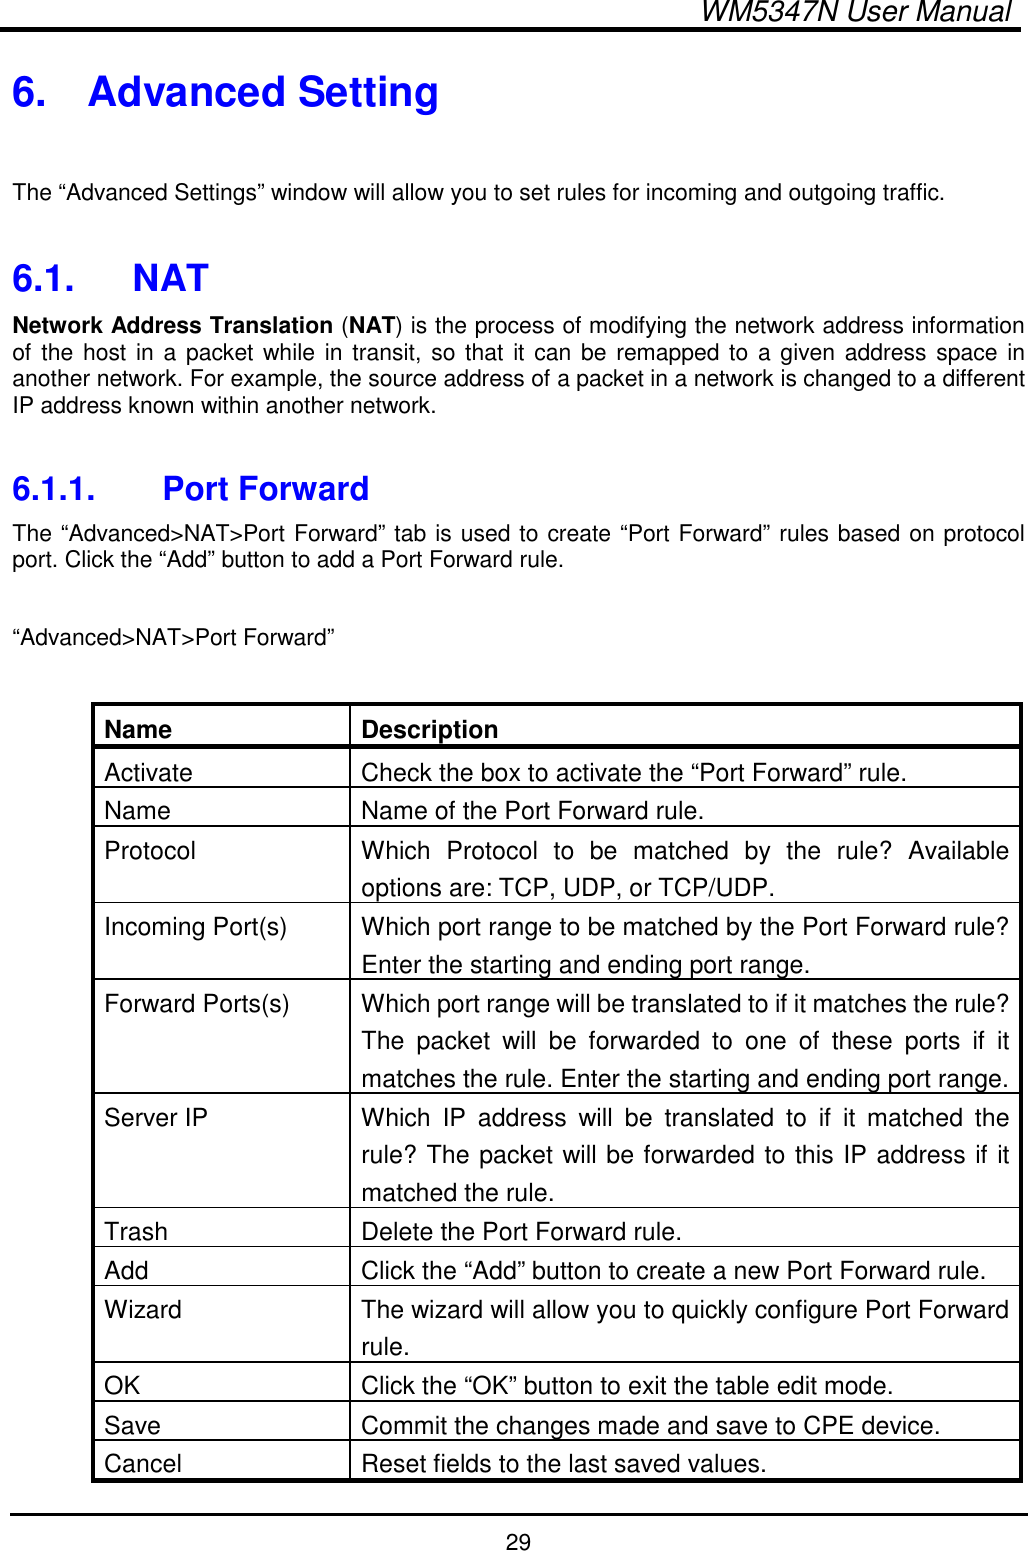  WM5347N User Manual  29 6.  Advanced Setting  The “Advanced Settings” window will allow you to set rules for incoming and outgoing traffic.  6.1.  NAT Network Address Translation (NAT) is the process of modifying the network address information of the host in  a packet while in transit, so that it can  be remapped to  a given address space  in another network. For example, the source address of a packet in a network is changed to a different IP address known within another network.  6.1.1.  Port Forward The “Advanced&gt;NAT&gt;Port Forward” tab is used to create “Port Forward” rules based on protocol port. Click the “Add” button to add a Port Forward rule.  “Advanced&gt;NAT&gt;Port Forward”  Name  Description Activate  Check the box to activate the “Port Forward” rule. Name  Name of the Port Forward rule. Protocol  Which  Protocol  to  be  matched  by  the  rule?  Available options are: TCP, UDP, or TCP/UDP. Incoming Port(s)  Which port range to be matched by the Port Forward rule? Enter the starting and ending port range. Forward Ports(s)  Which port range will be translated to if it matches the rule? The  packet  will  be  forwarded  to  one  of  these  ports  if  it matches the rule. Enter the starting and ending port range. Server IP  Which  IP  address  will  be  translated  to  if  it  matched  the rule? The packet will be forwarded to this IP address if it matched the rule. Trash  Delete the Port Forward rule. Add  Click the “Add” button to create a new Port Forward rule. Wizard  The wizard will allow you to quickly configure Port Forward rule. OK  Click the “OK” button to exit the table edit mode. Save  Commit the changes made and save to CPE device. Cancel  Reset fields to the last saved values. 